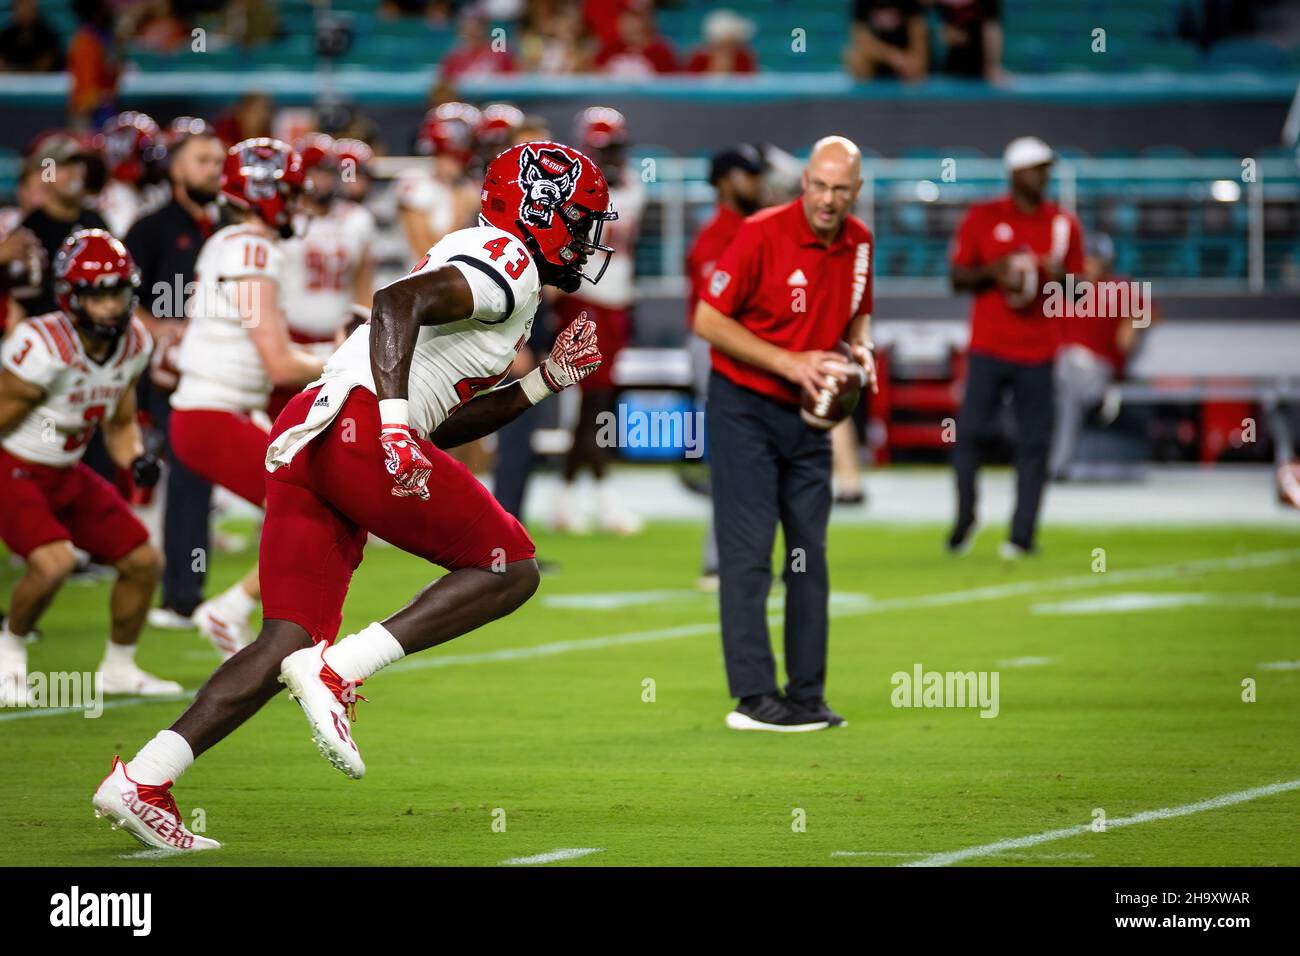 23 octobre 2021 - Miami Gardens, Floride, États-Unis: Miami Hurricanes v NC State Wolfpack, 2021 College football Game au Hard Rock Stadium. Banque D'Images